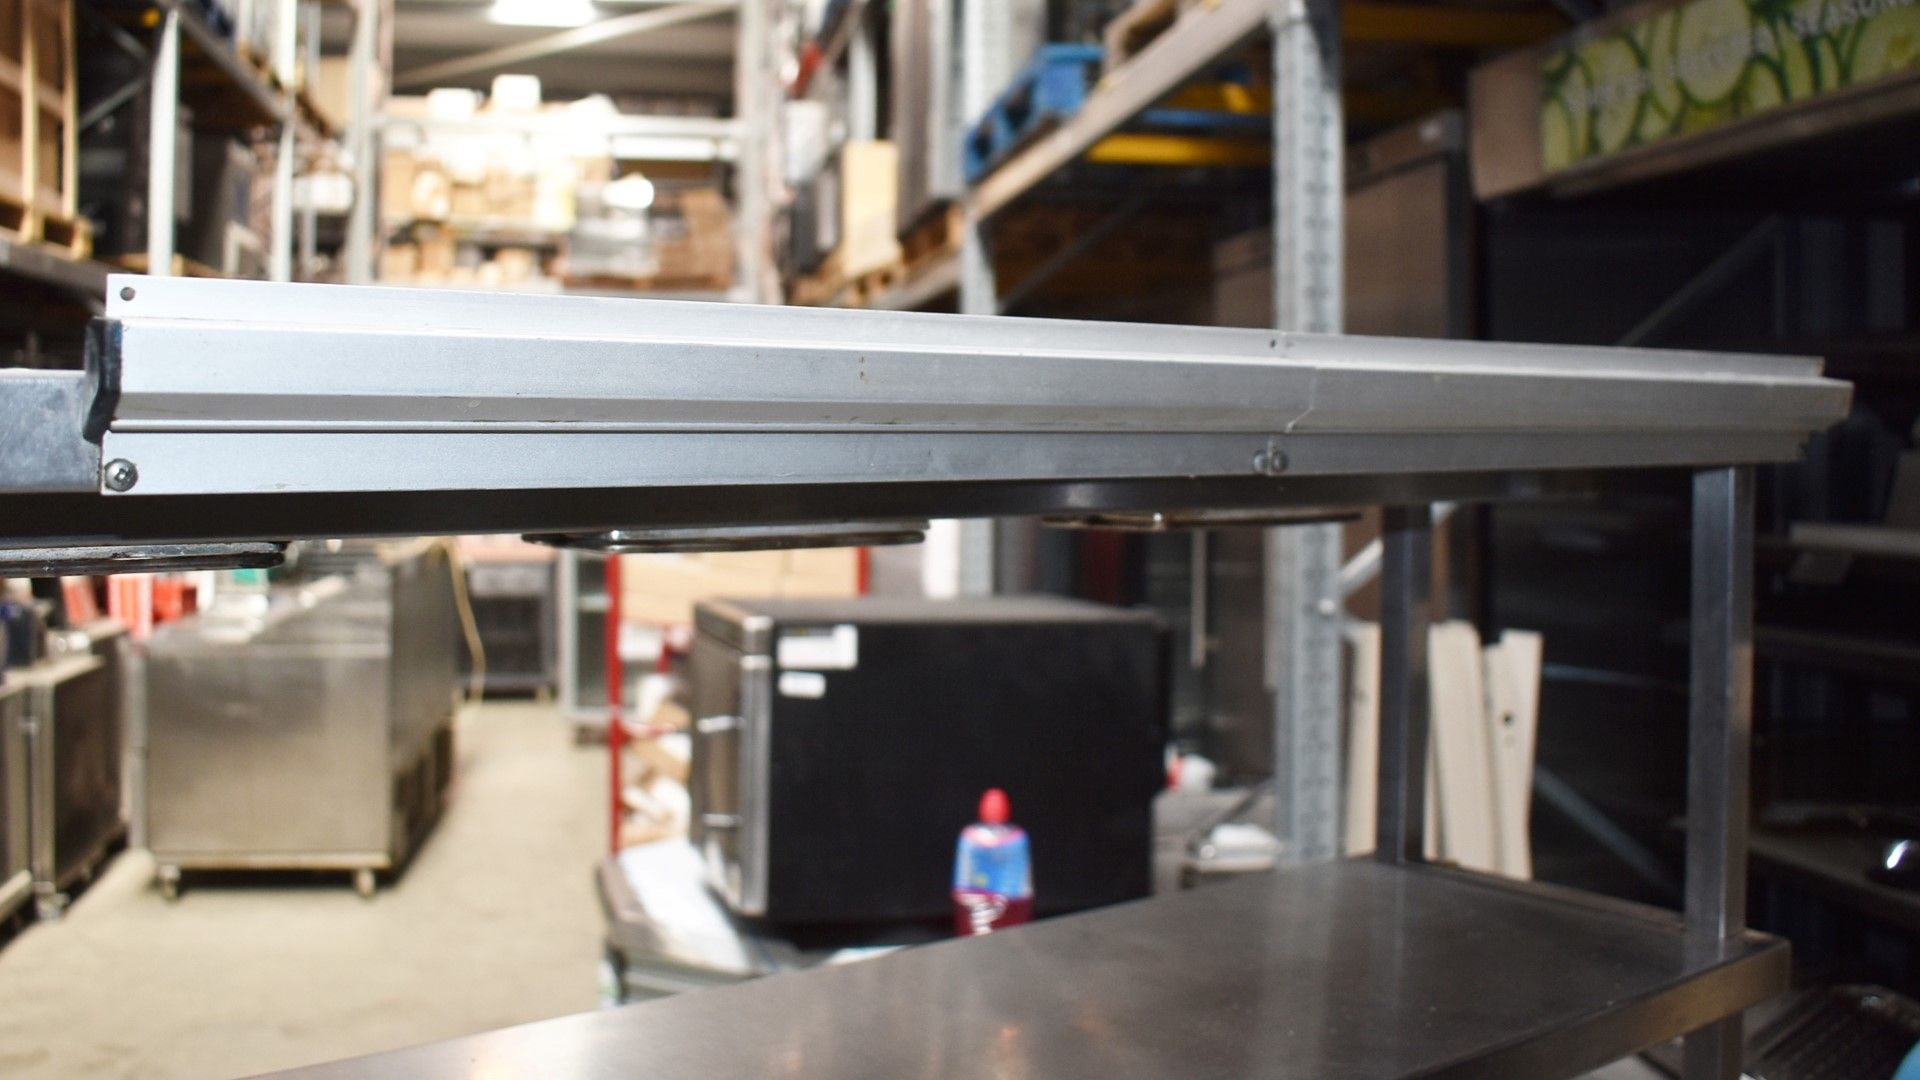 1 x Stainless Steel Hot Cabinet With Overhead Heated Passthrough Shelves and Order Ticket Rail - Image 11 of 11